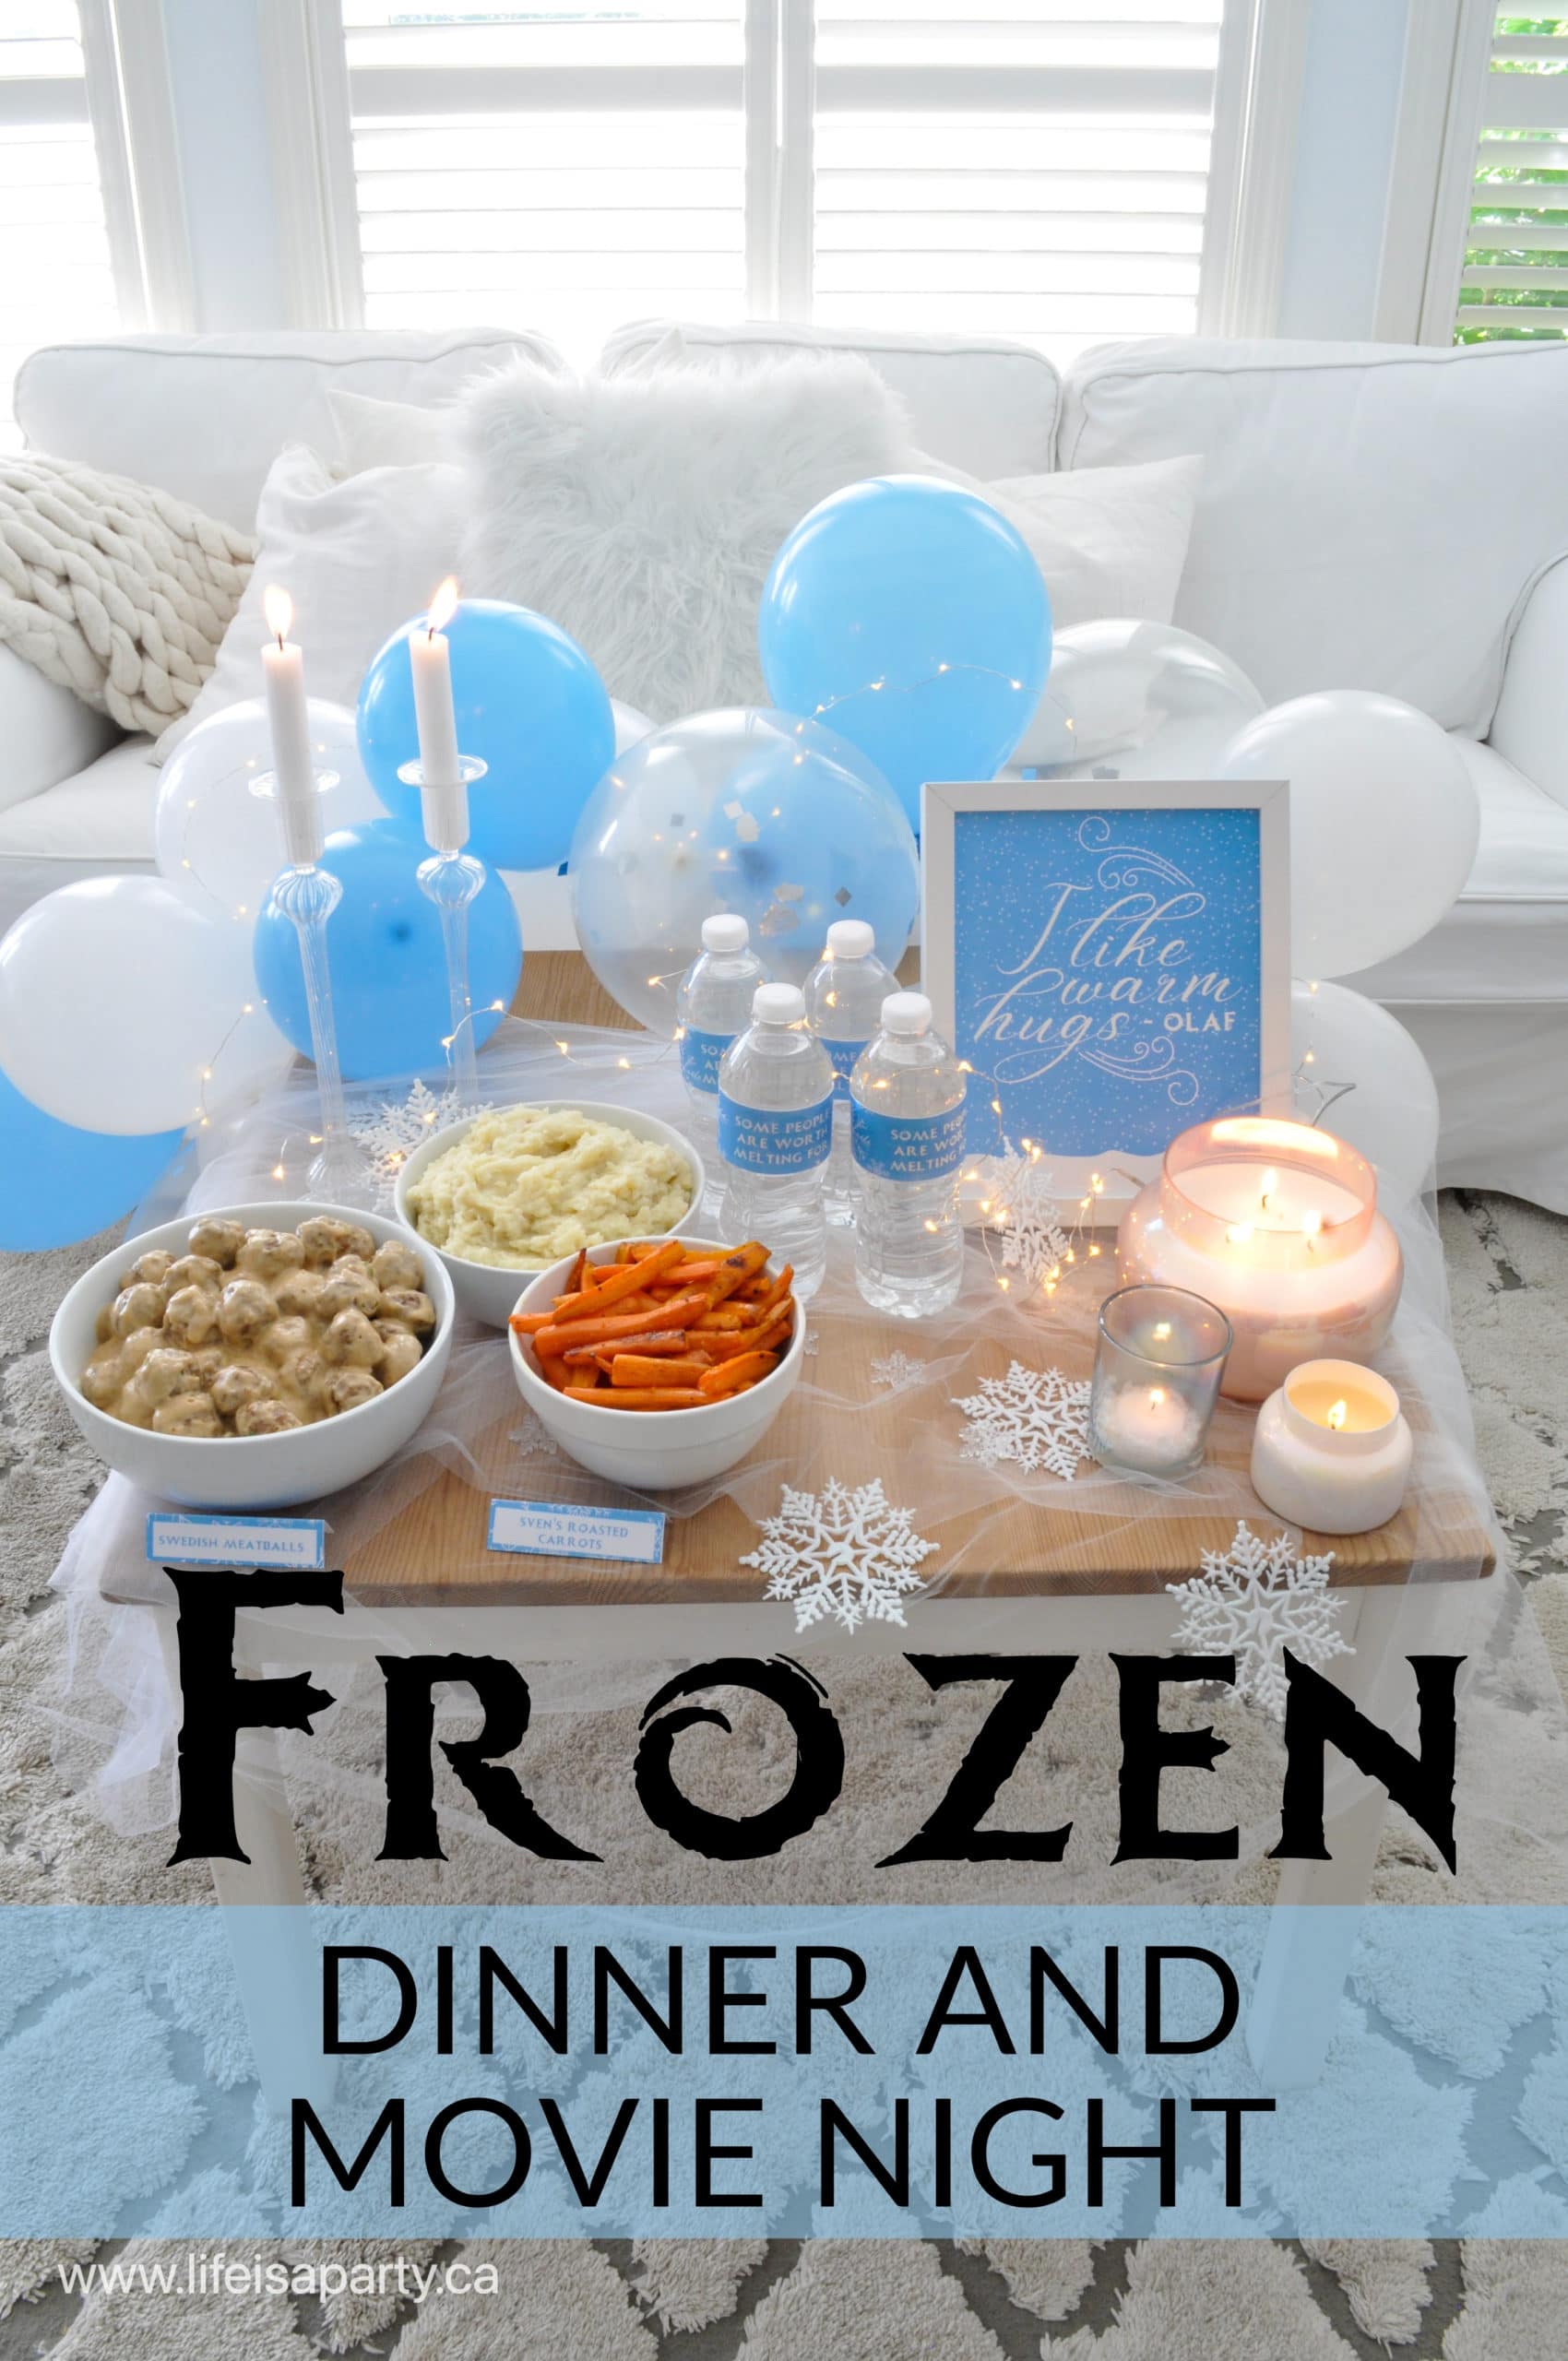 Frozen Themed Party -Dinner and Movie Night